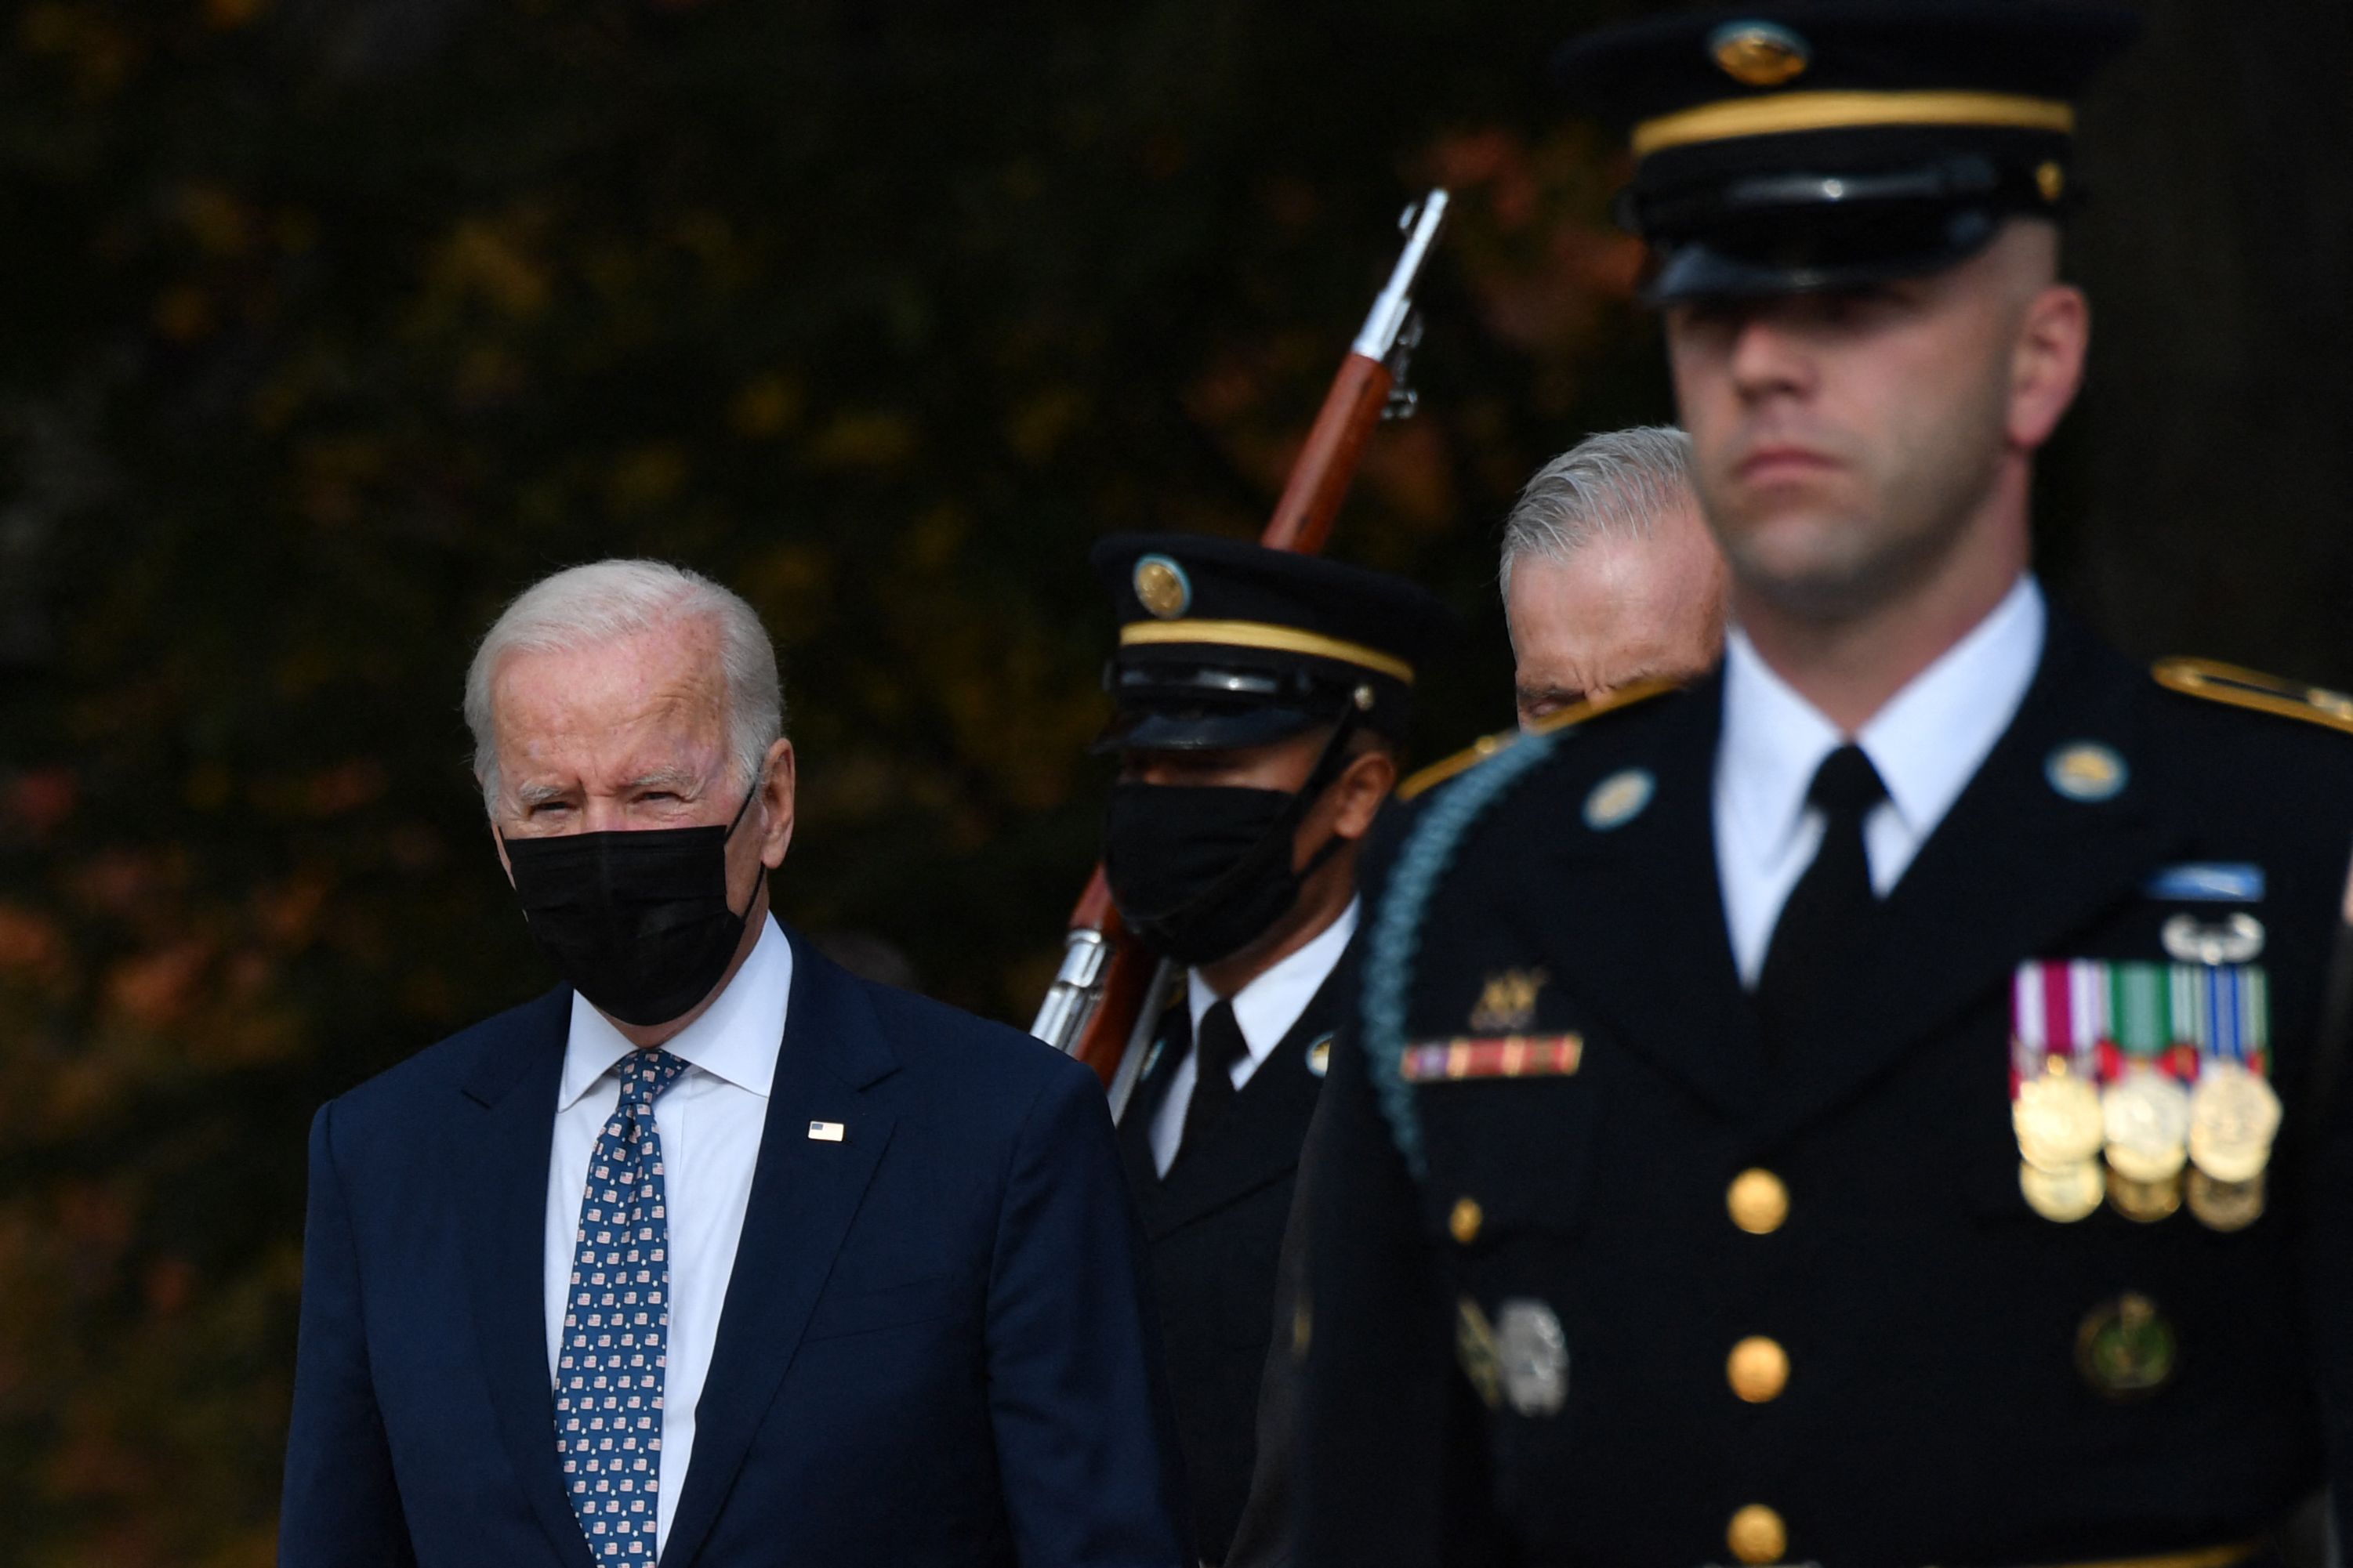 Biden at the 100th anniversary of the Tomb of the Unknown Soldier on Nov. 11.